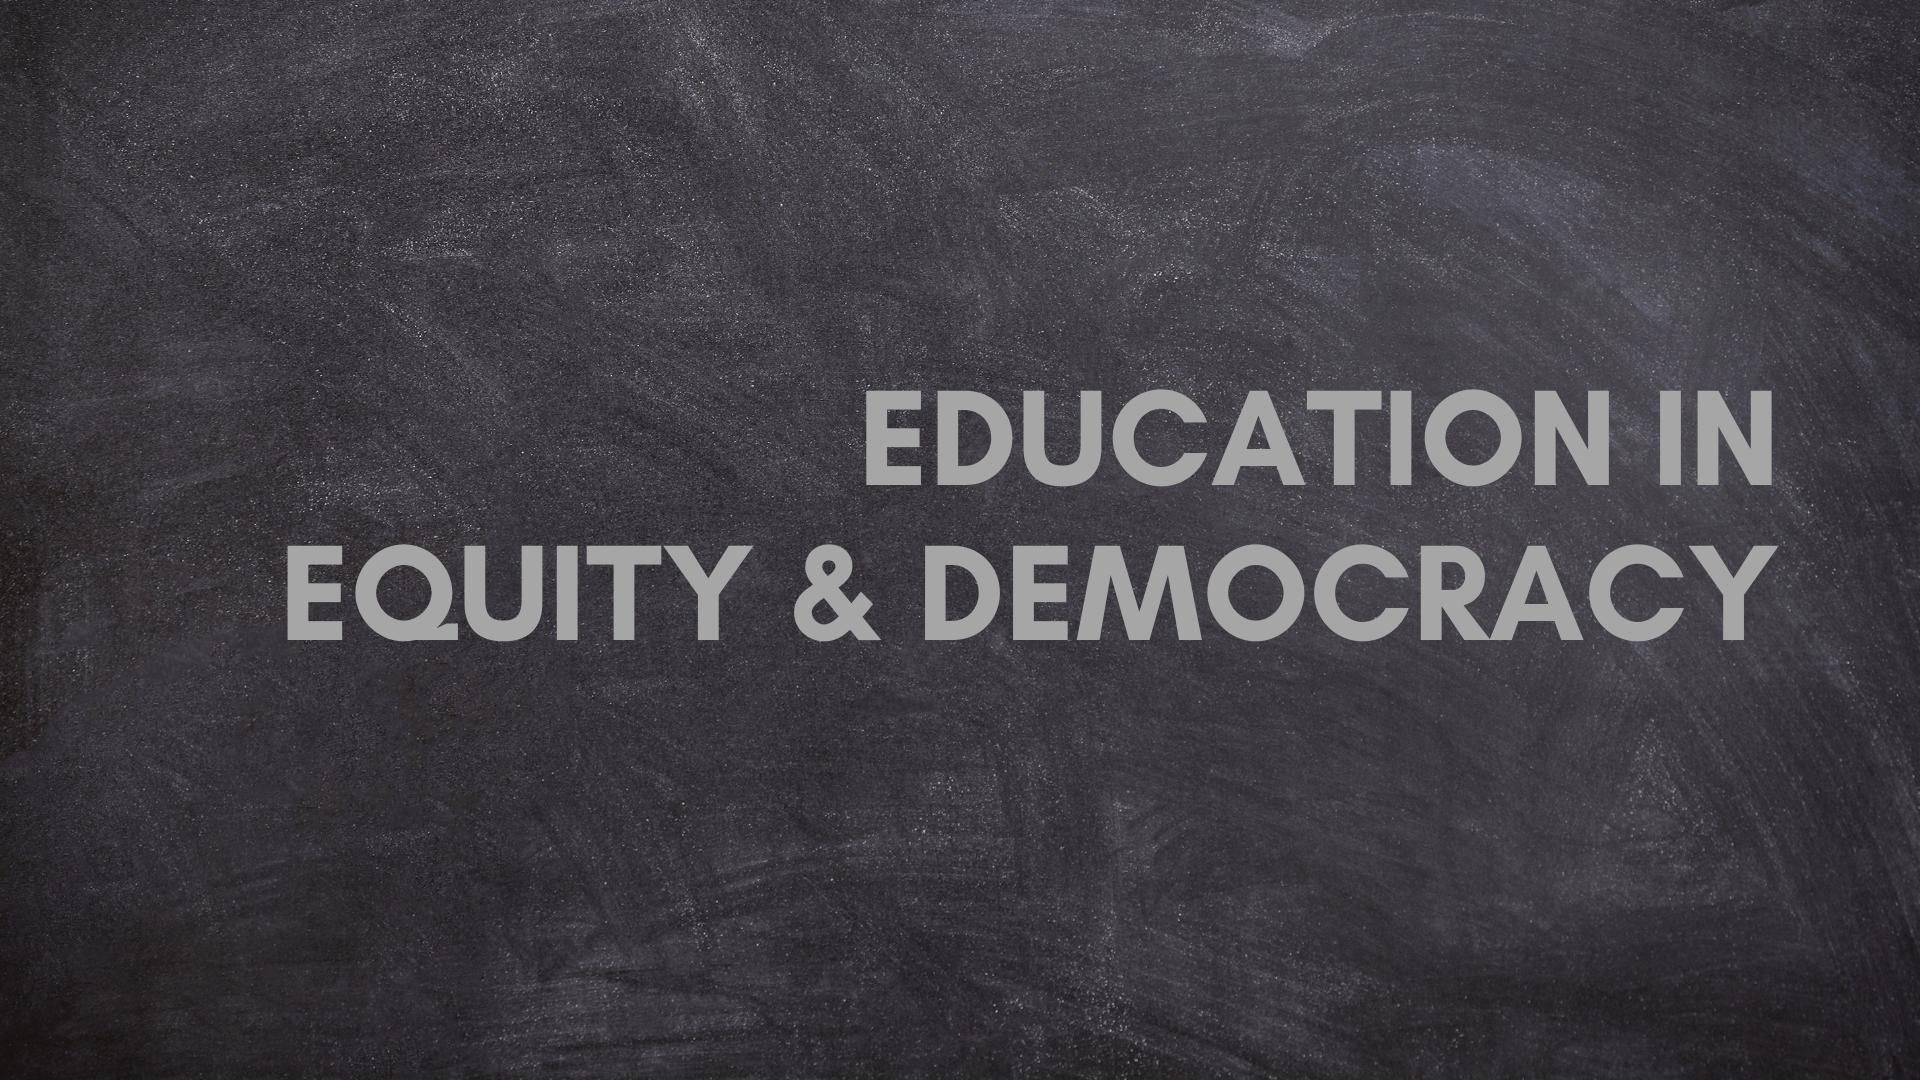 Education in Equity and Democracy